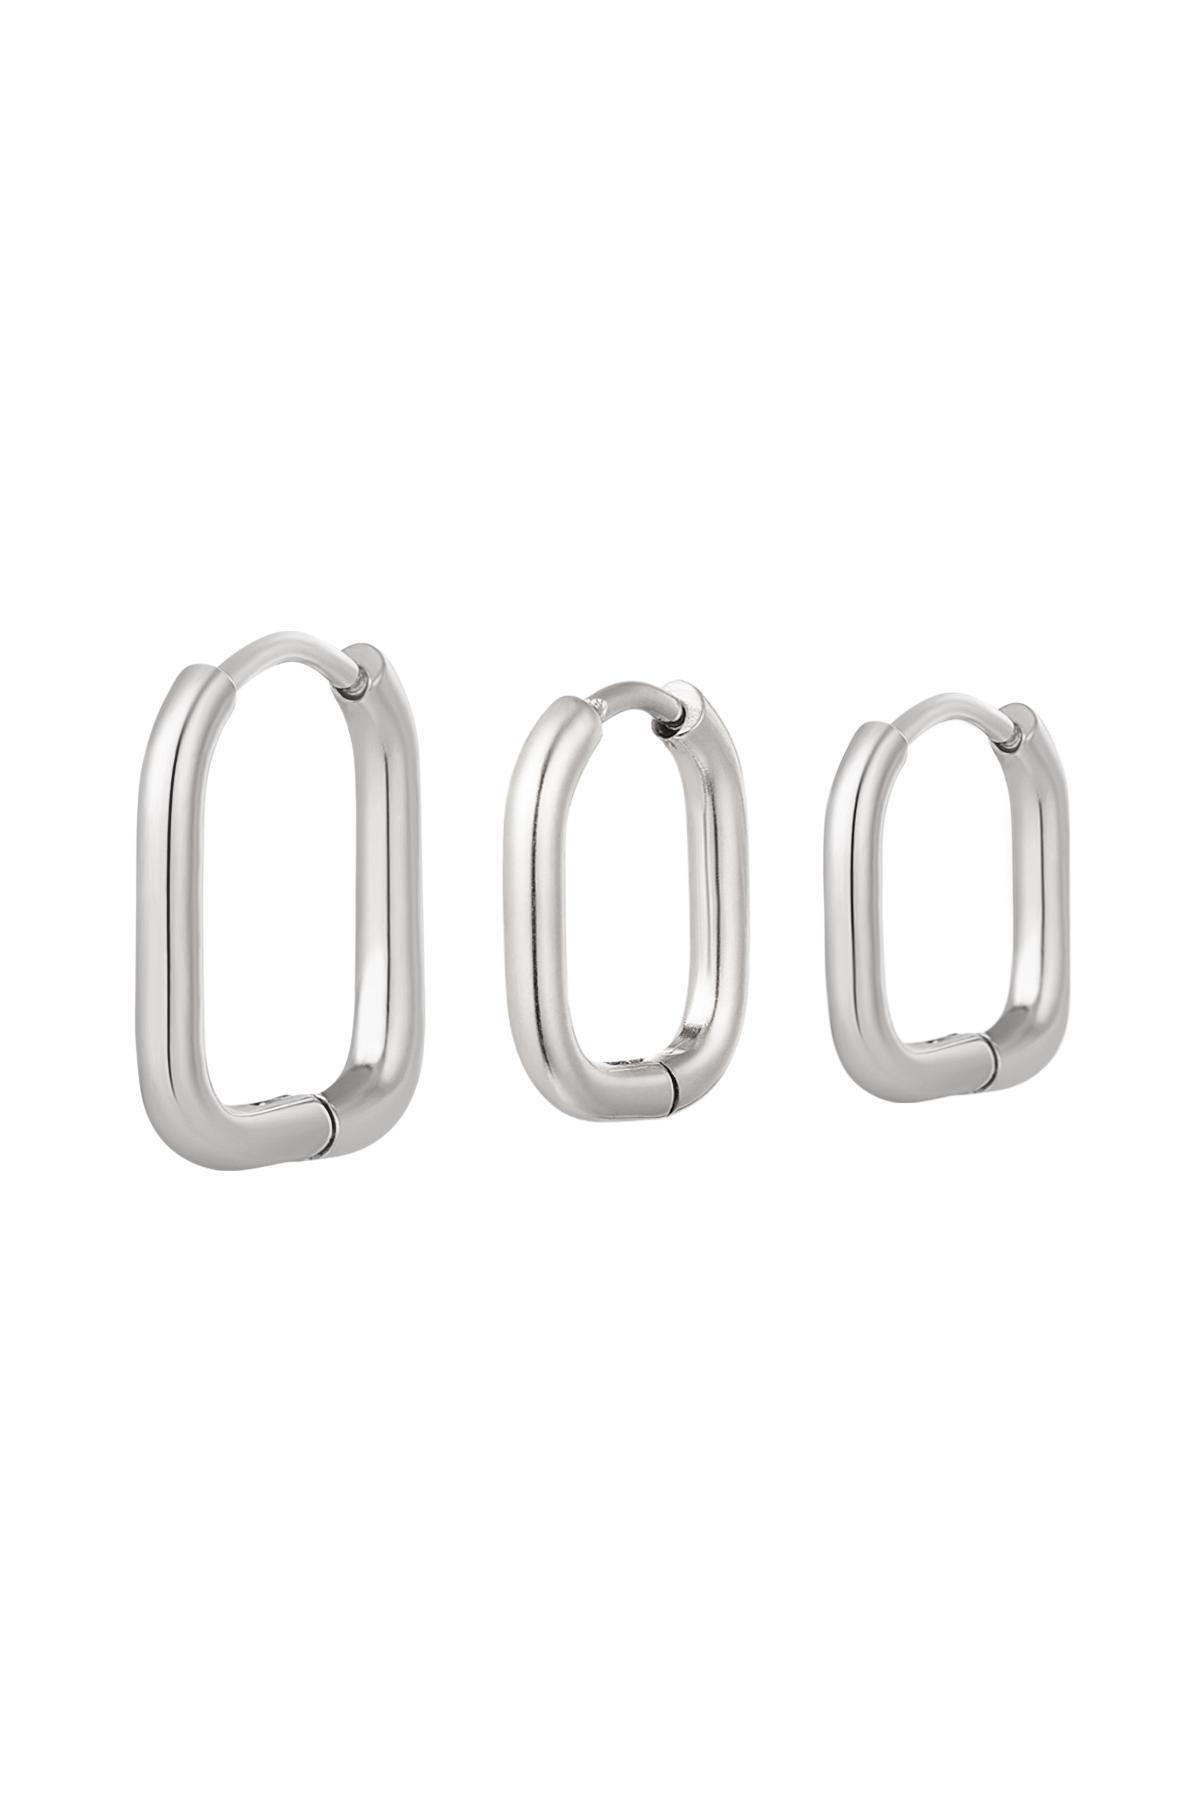 Set of earrings 3 different sizes Silver Stainless Steel h5 